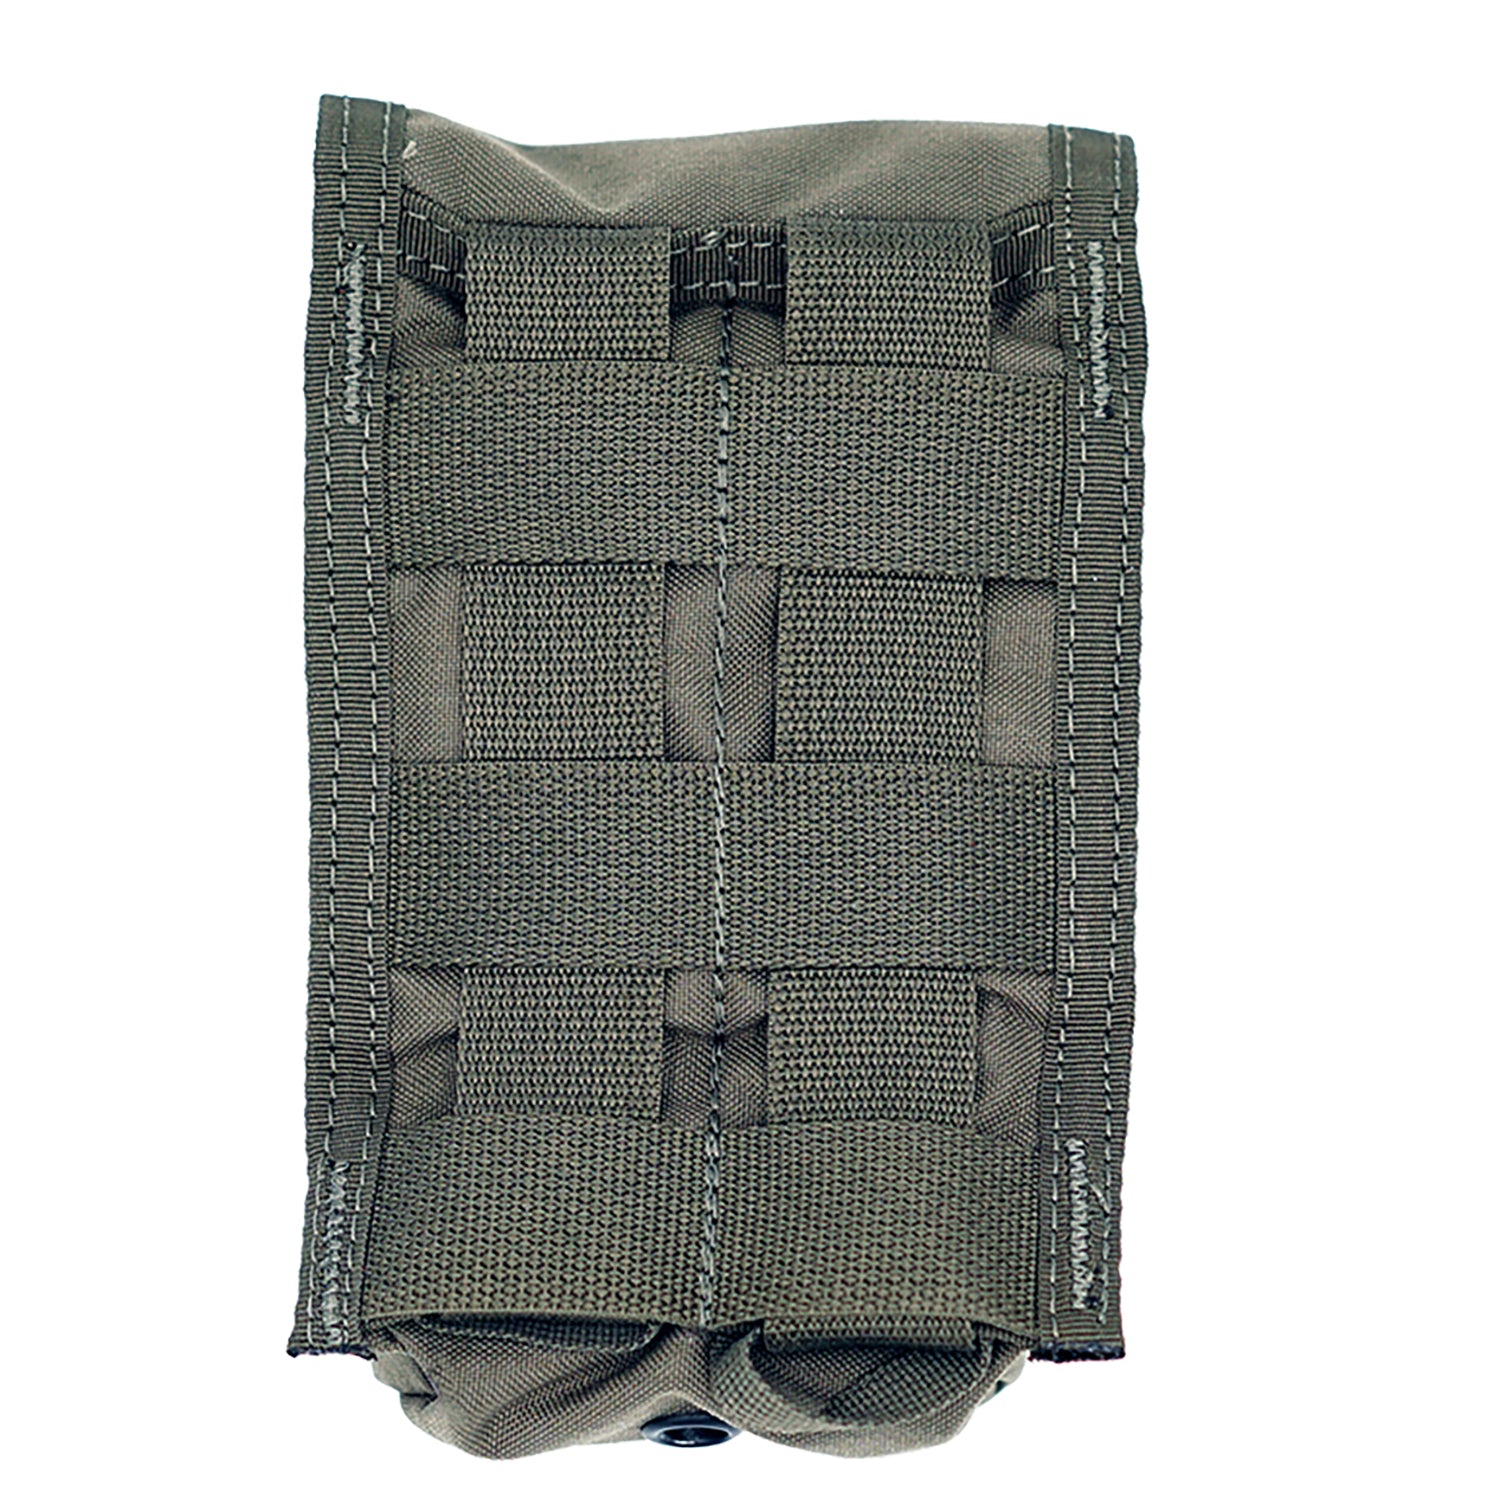 Pre MSA Paraclete style Smoke green tiered SR25 mag pouch